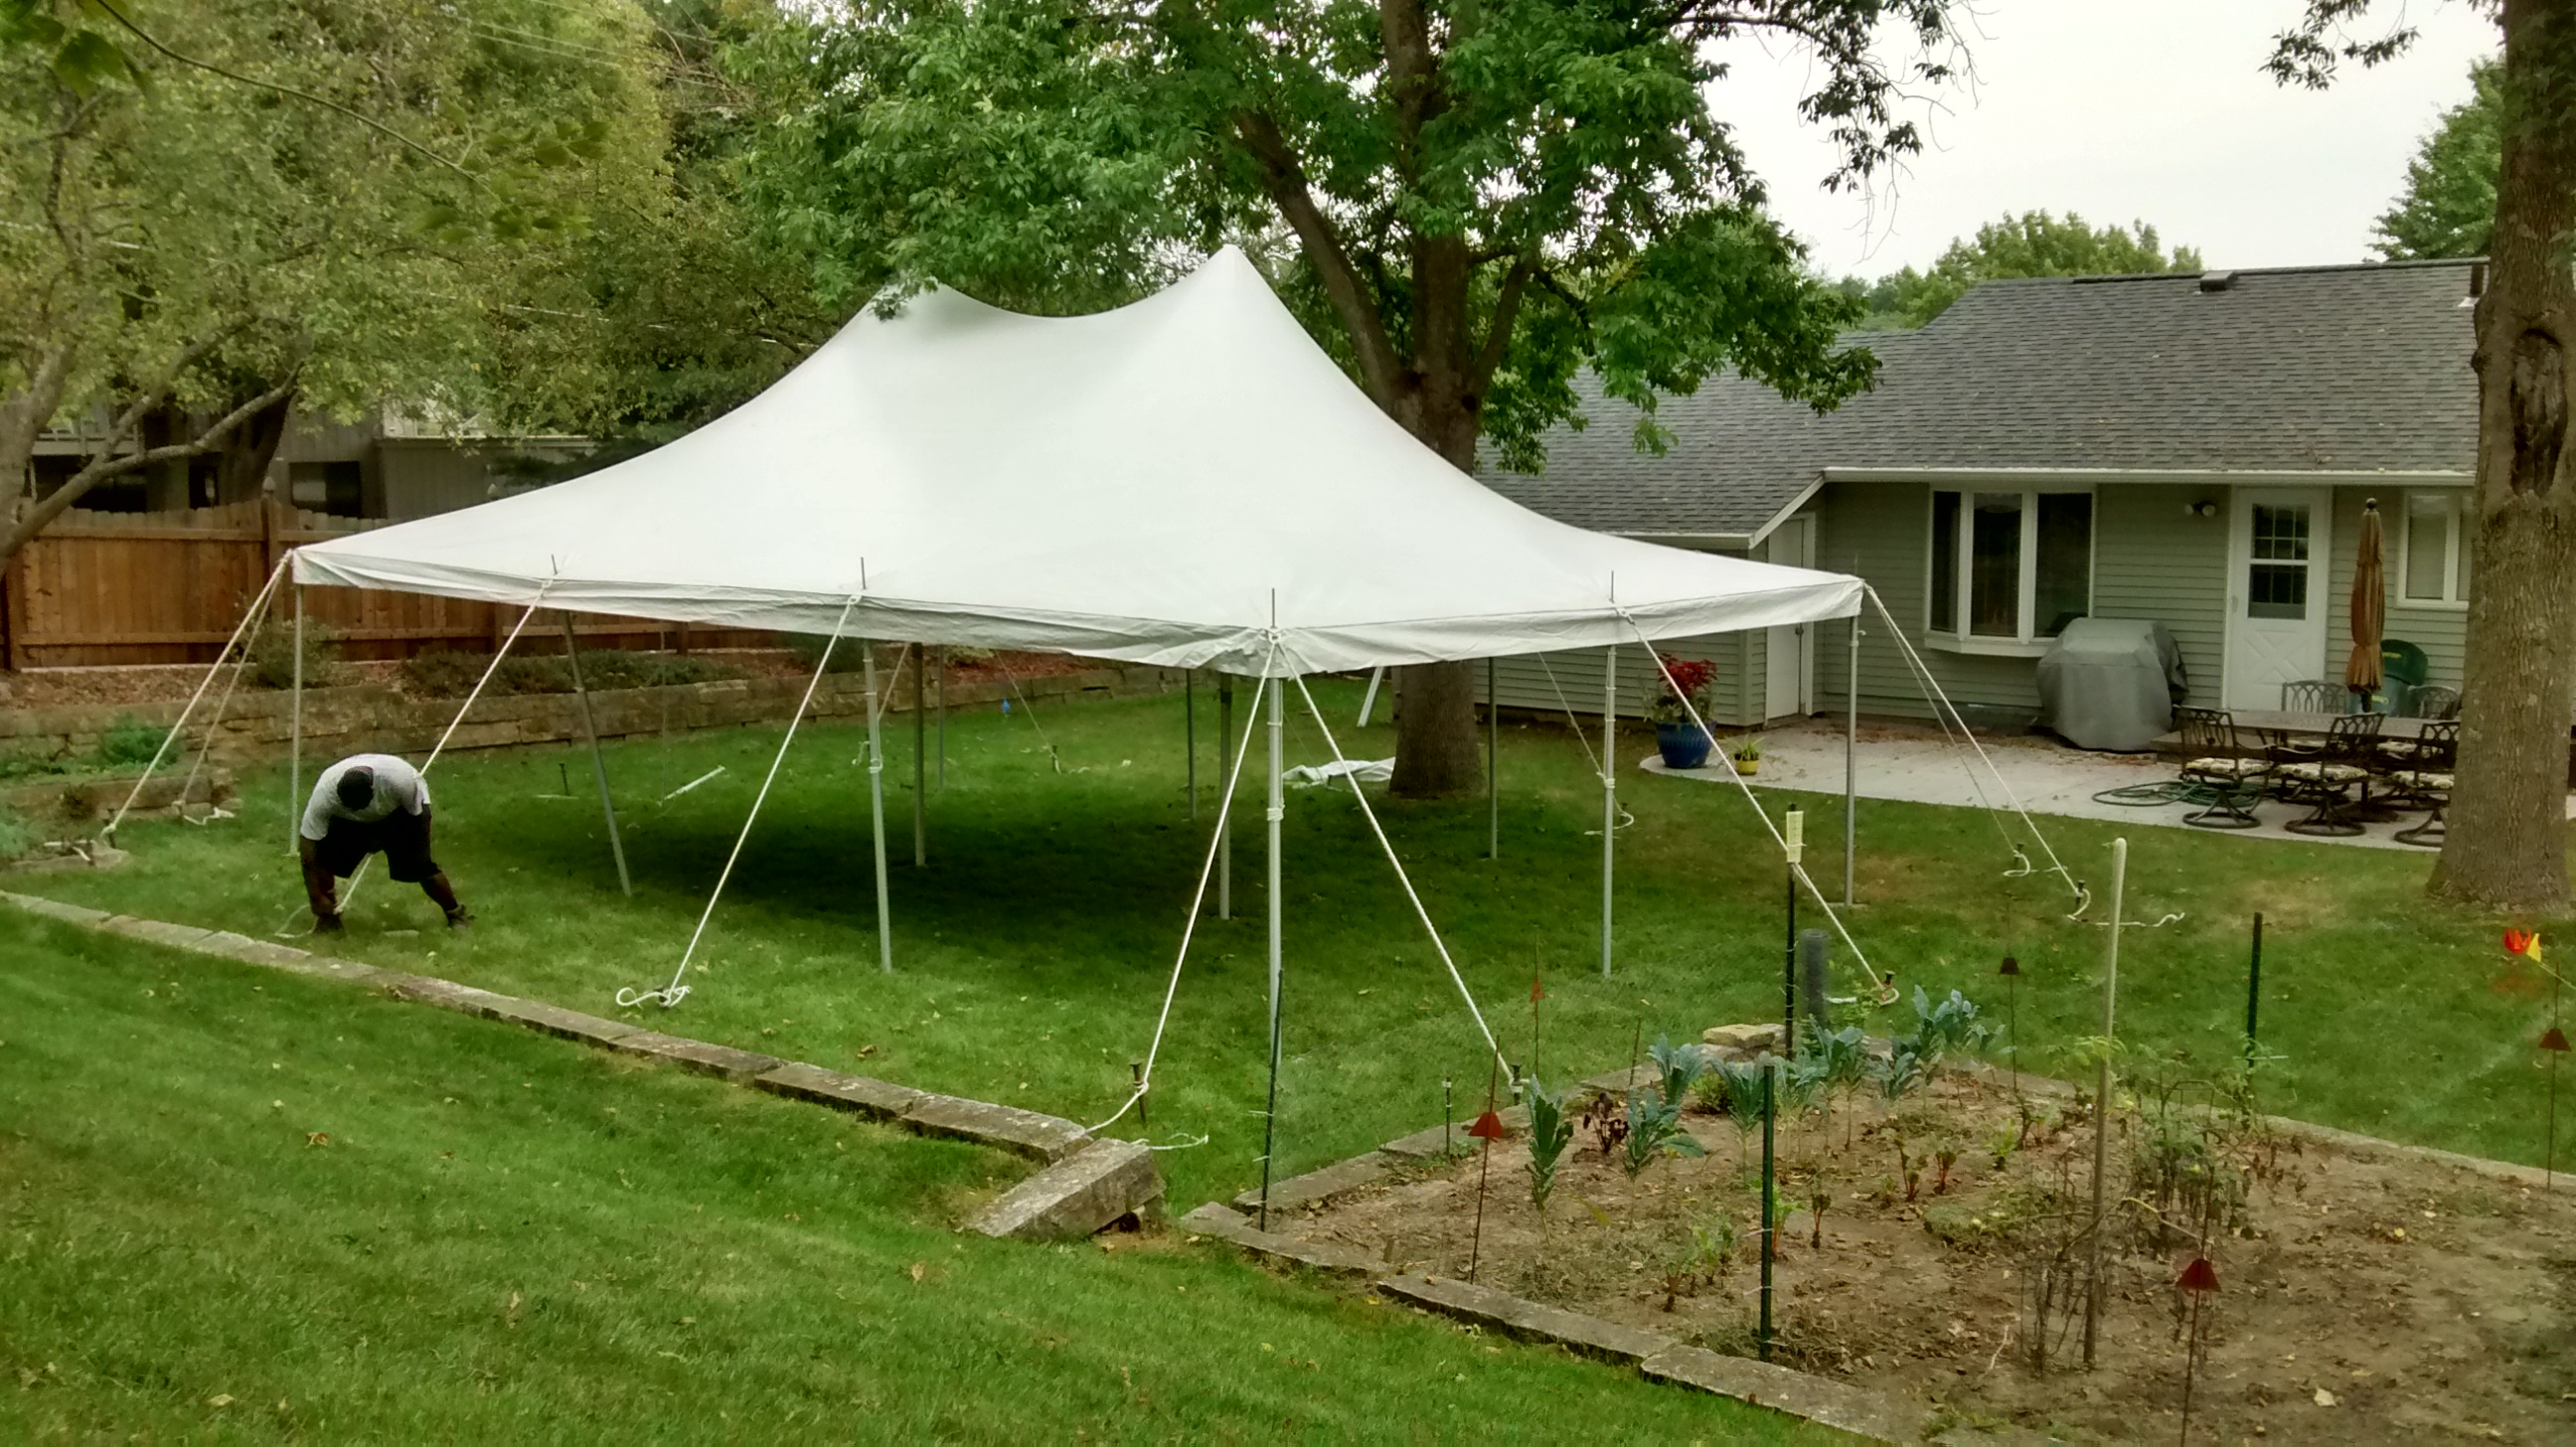 20' x 30' rope and pole tent fit under a tree in the backyard